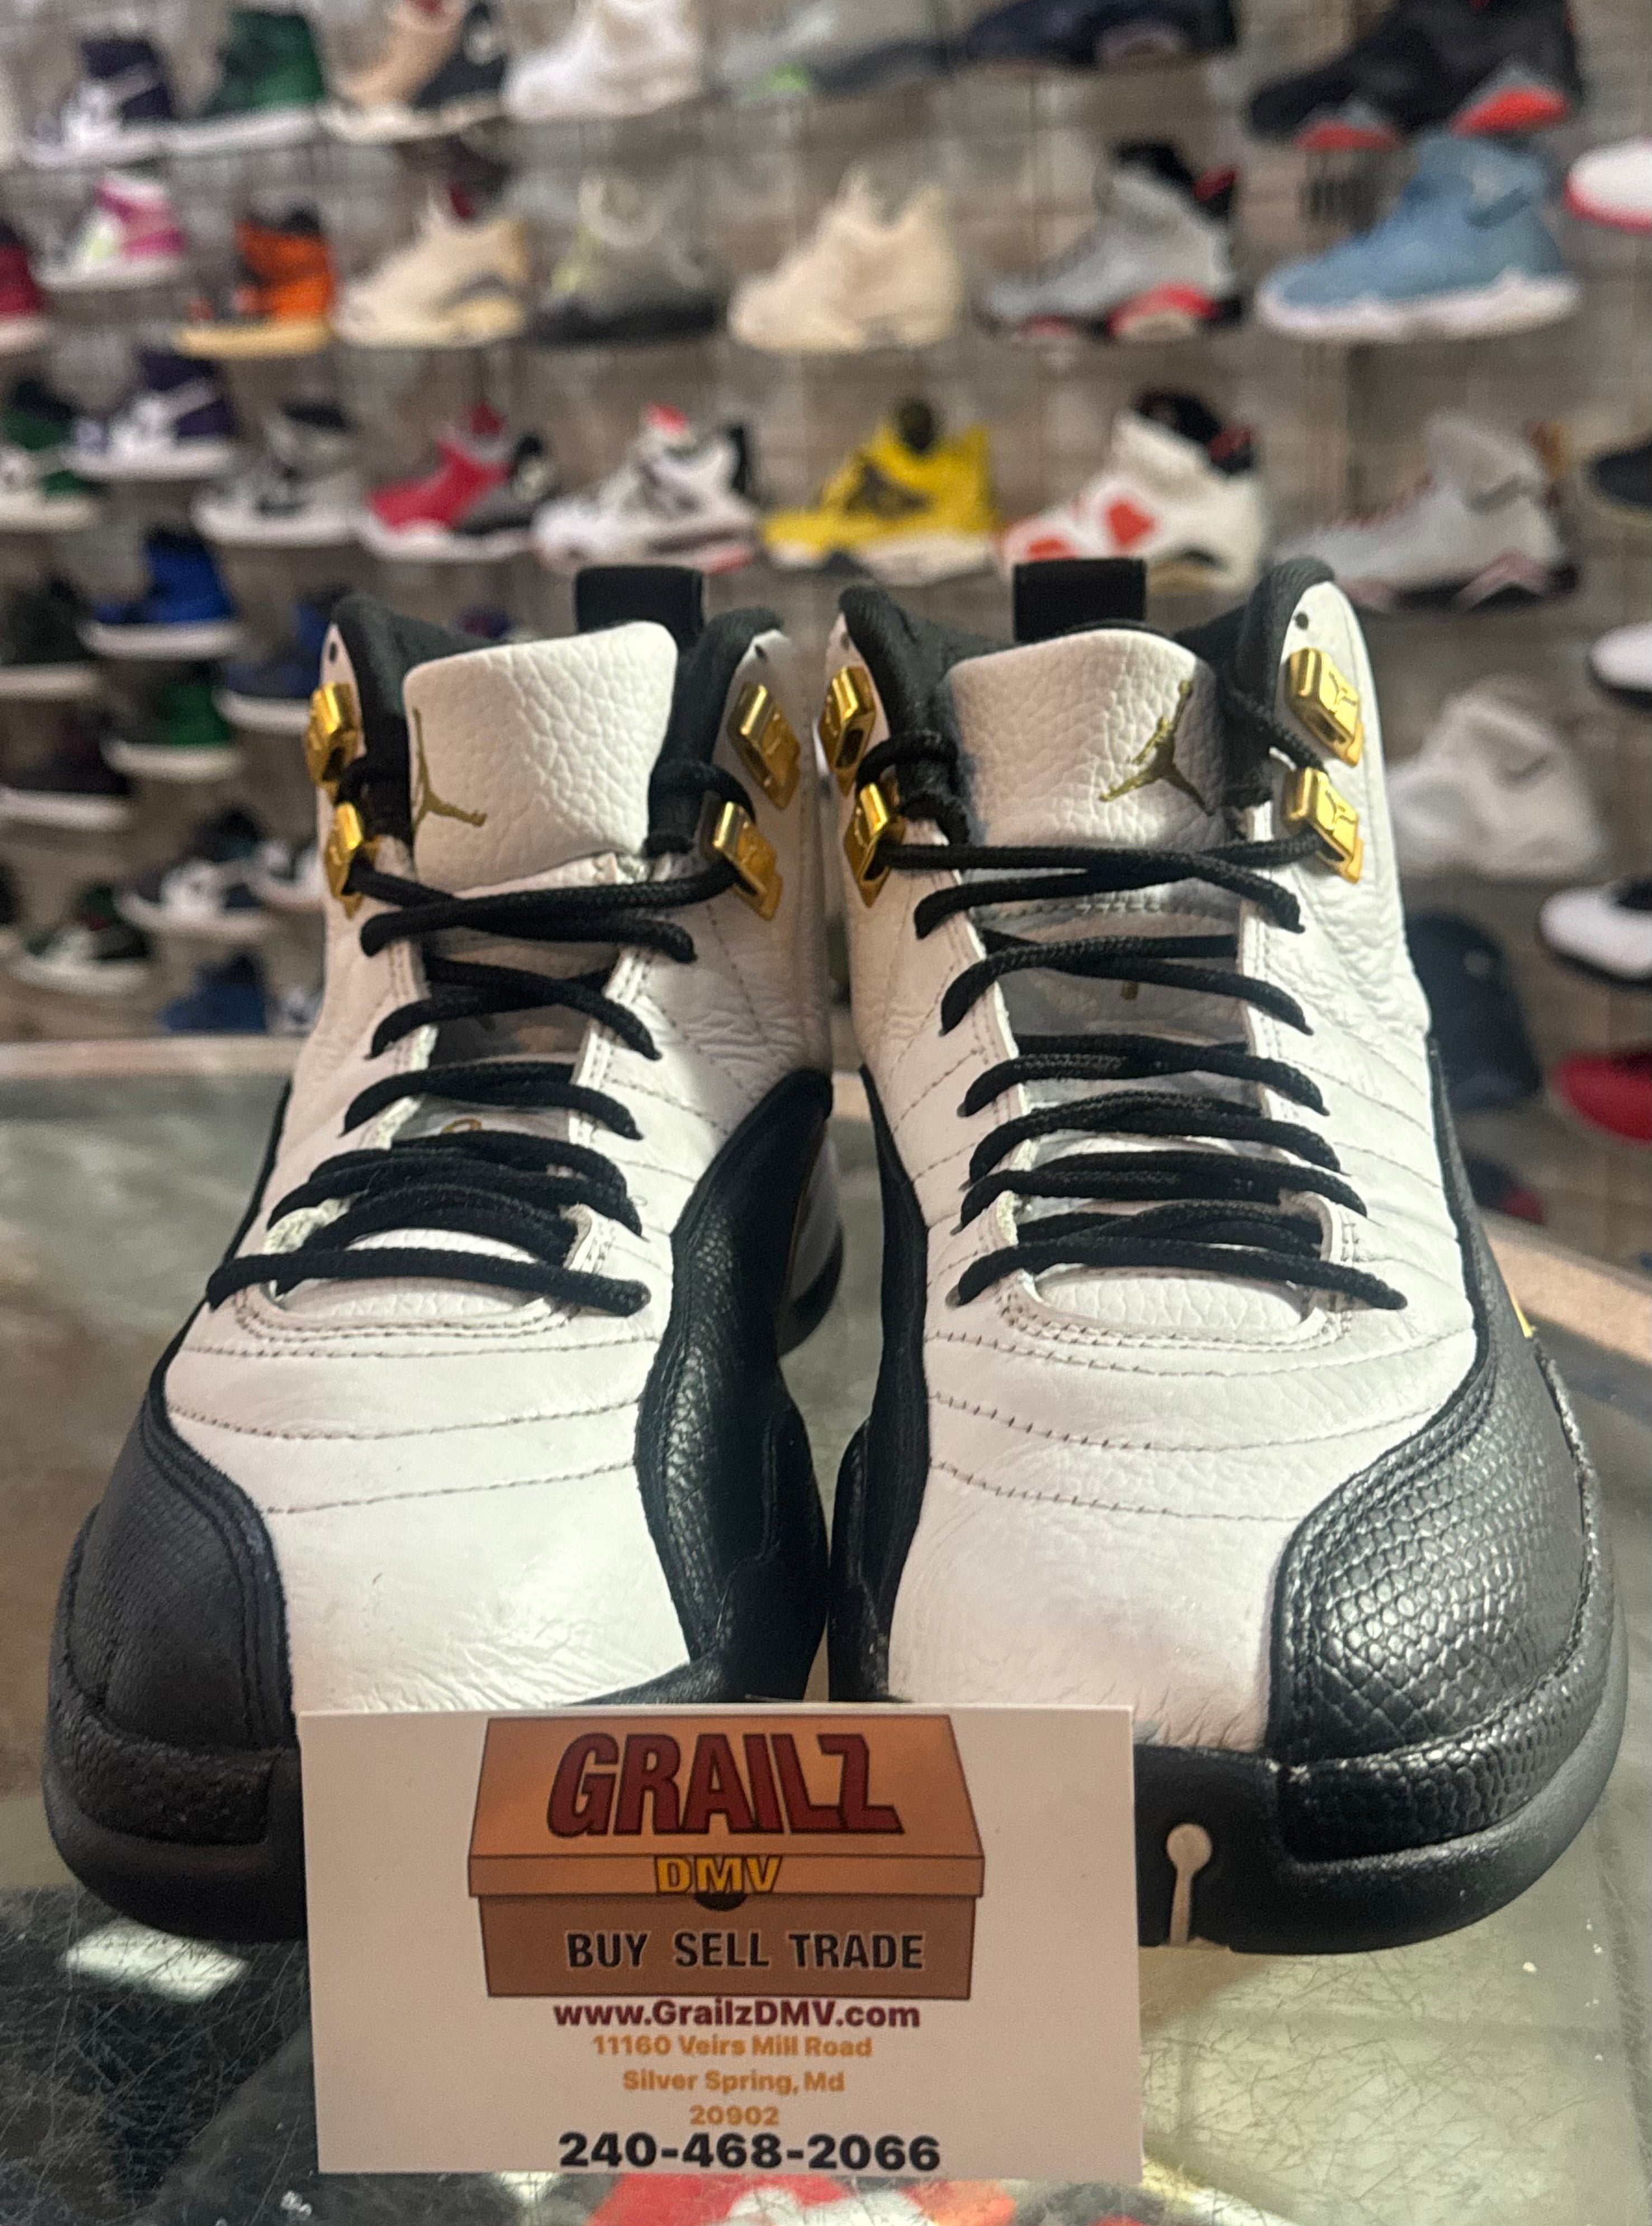 Royalty 12s Size 8